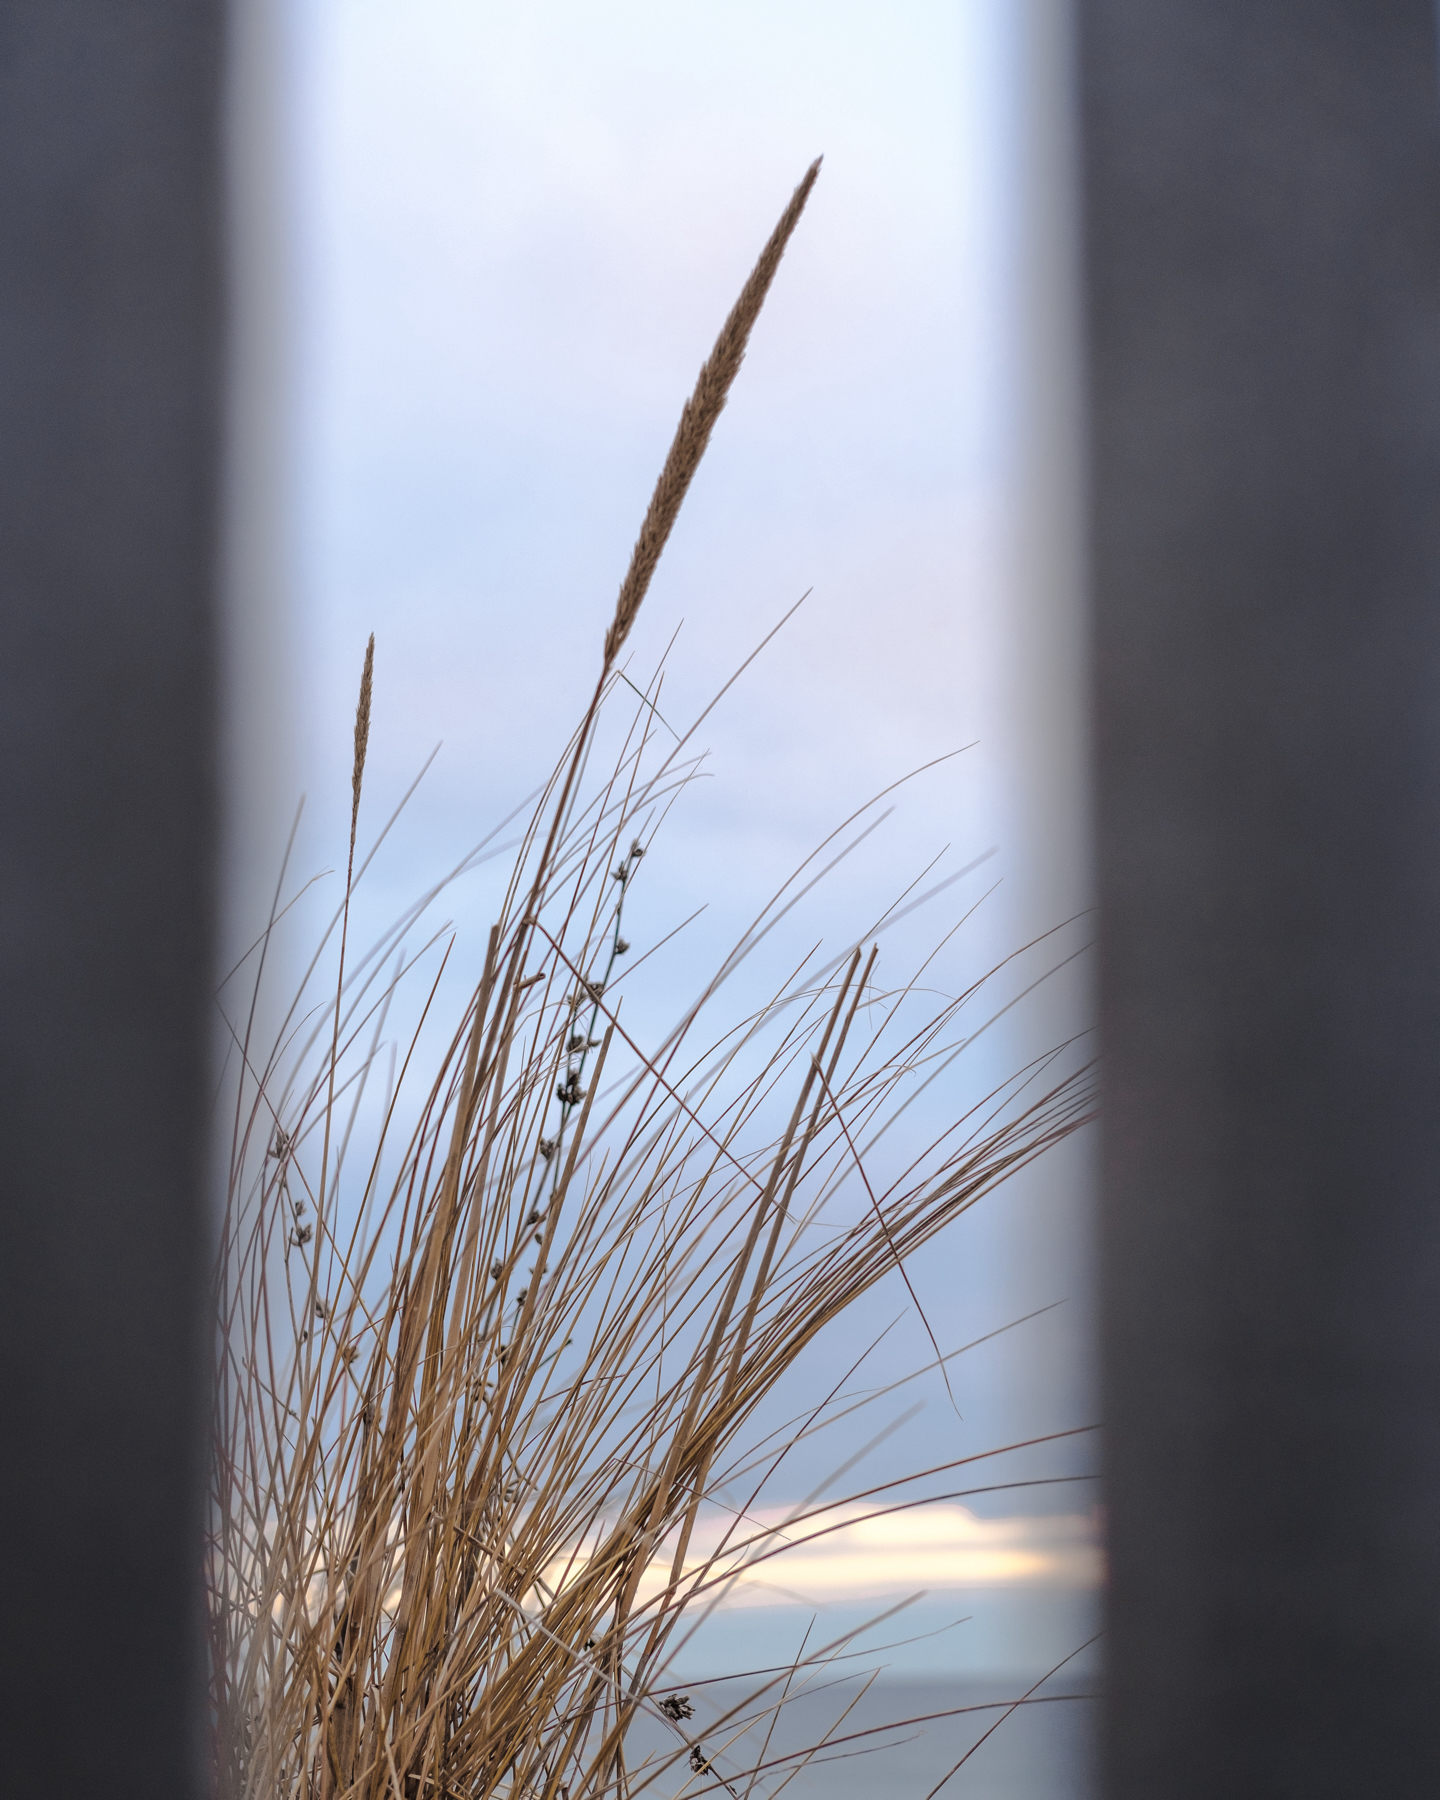 Dry grasses viewed through a narrow gap between two vertical fence slats, with a soft-focus background of a cloudy sky with a pale sunrise